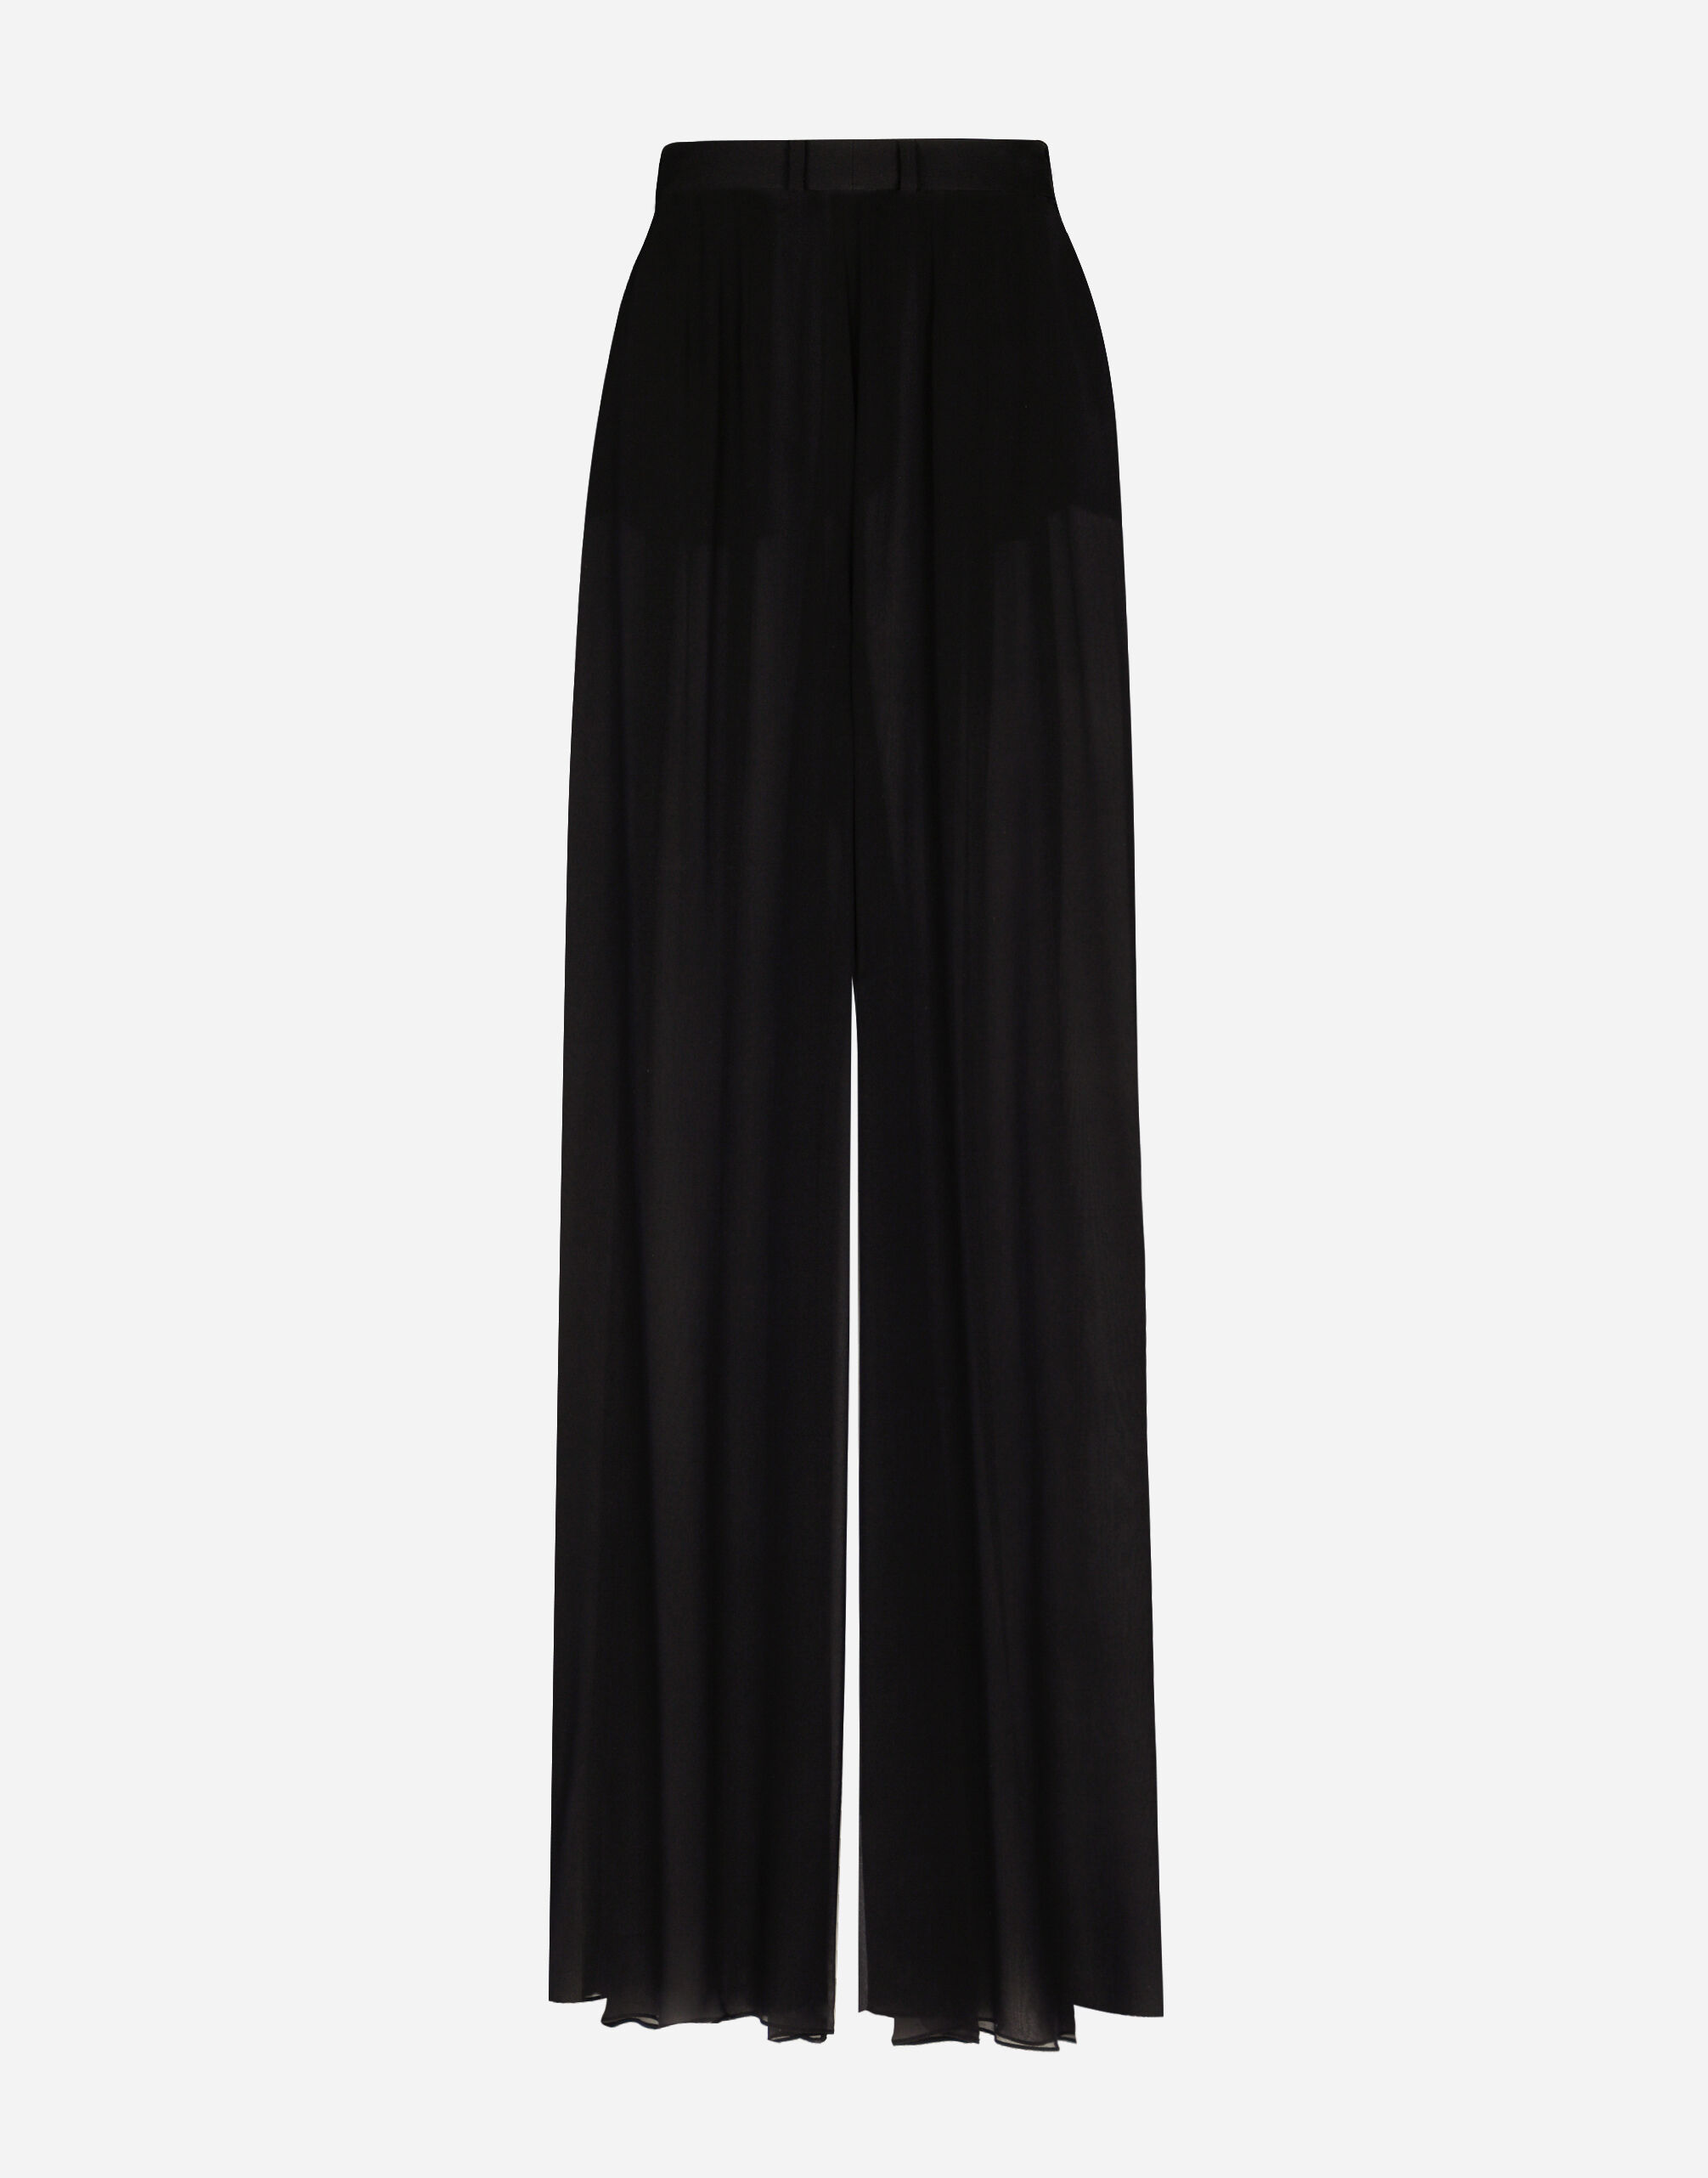 Buy Wide Leg Pants for Women / High Waist Pants / Women's Pants / Black  Pants / Elegant Pants / Wide Leg Trousers / Trousers for Women Online in  India - Etsy